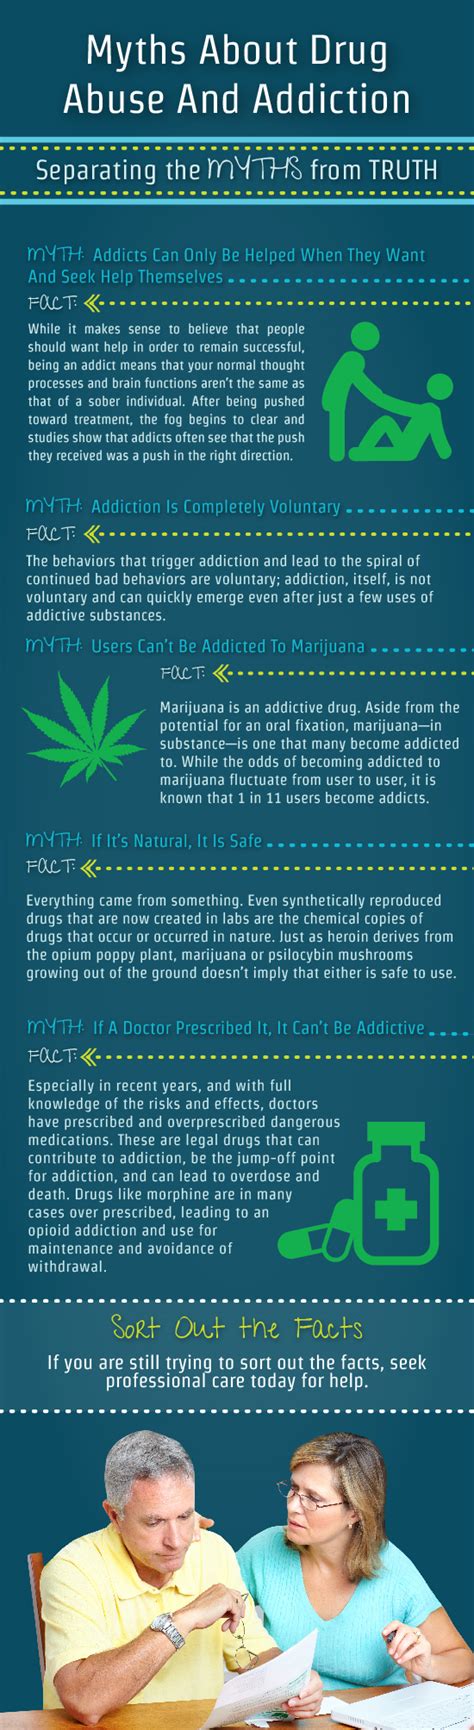 Myths About Drug Abuse And Addiction Infographic